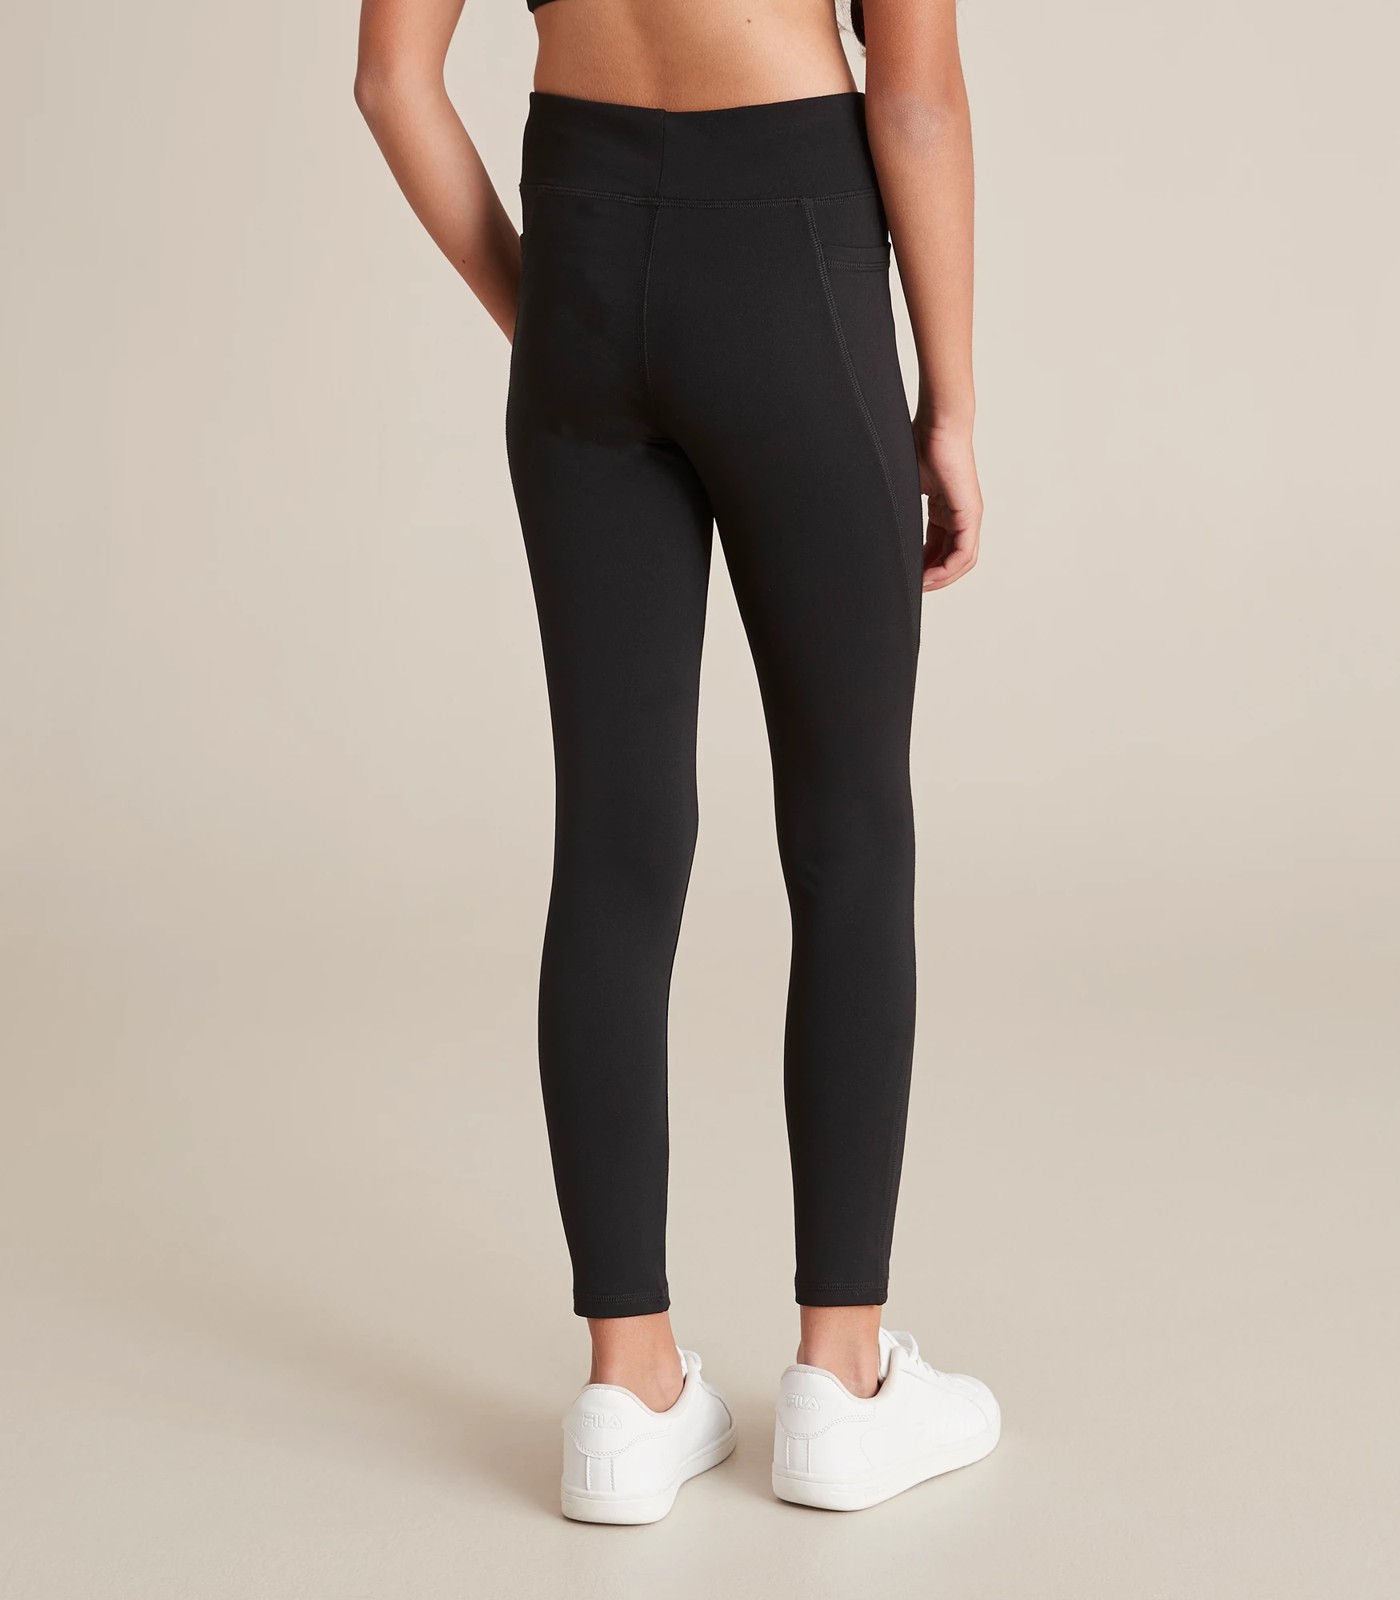 Are $40 Target Active Leggings Worth It?